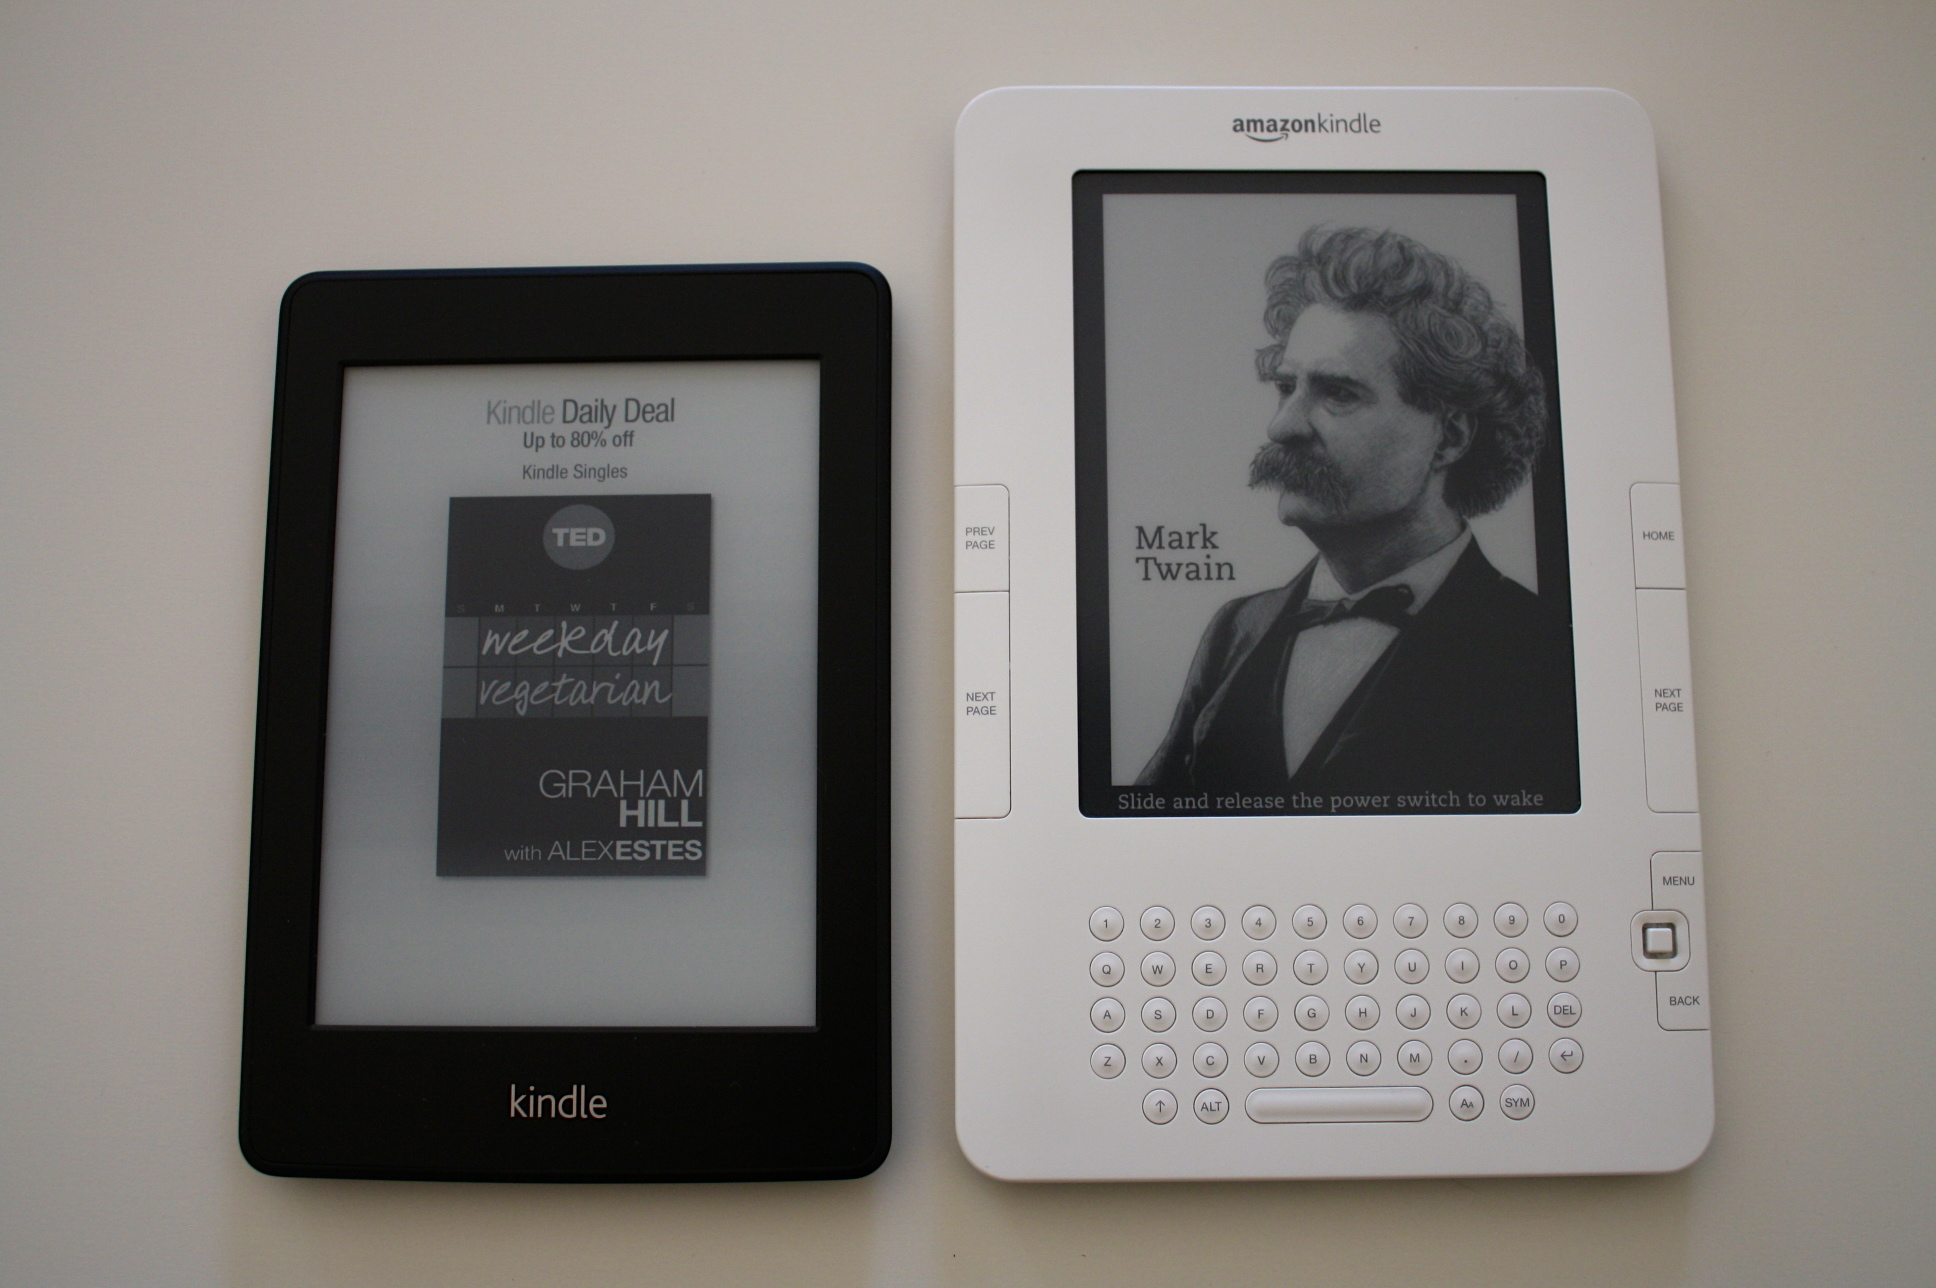 Brighter, sharper, and ad-filled: The Kindle Paperwhite review | Ars Technica